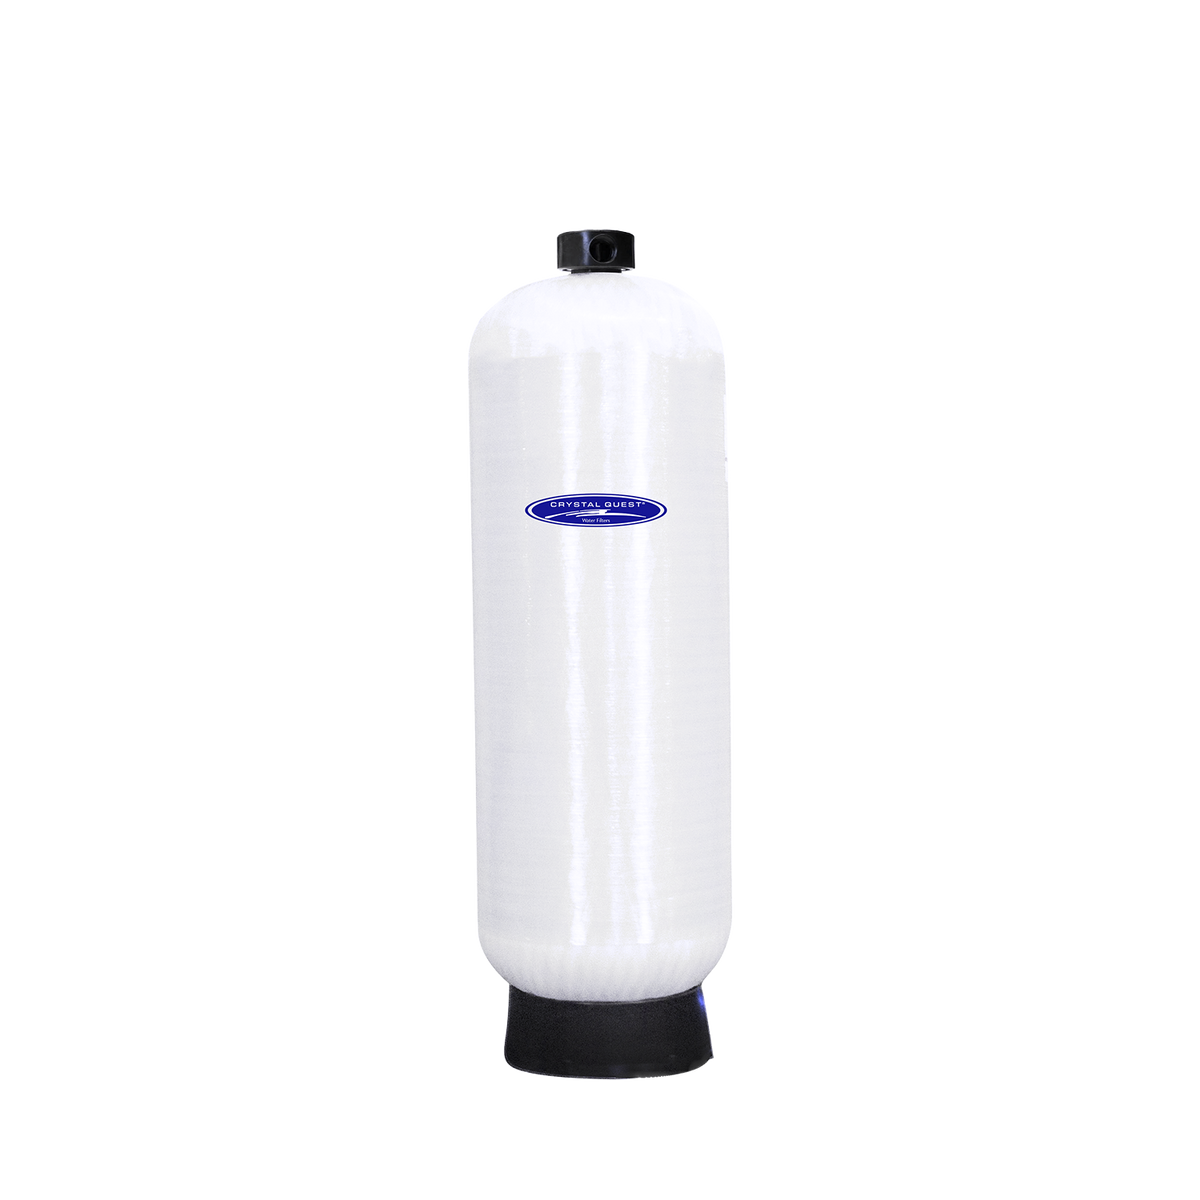 60 GPM / Aluminum Oxide / Manual (Upflow) Fluoride Removal Water Filtration System - Commercial - Crystal Quest